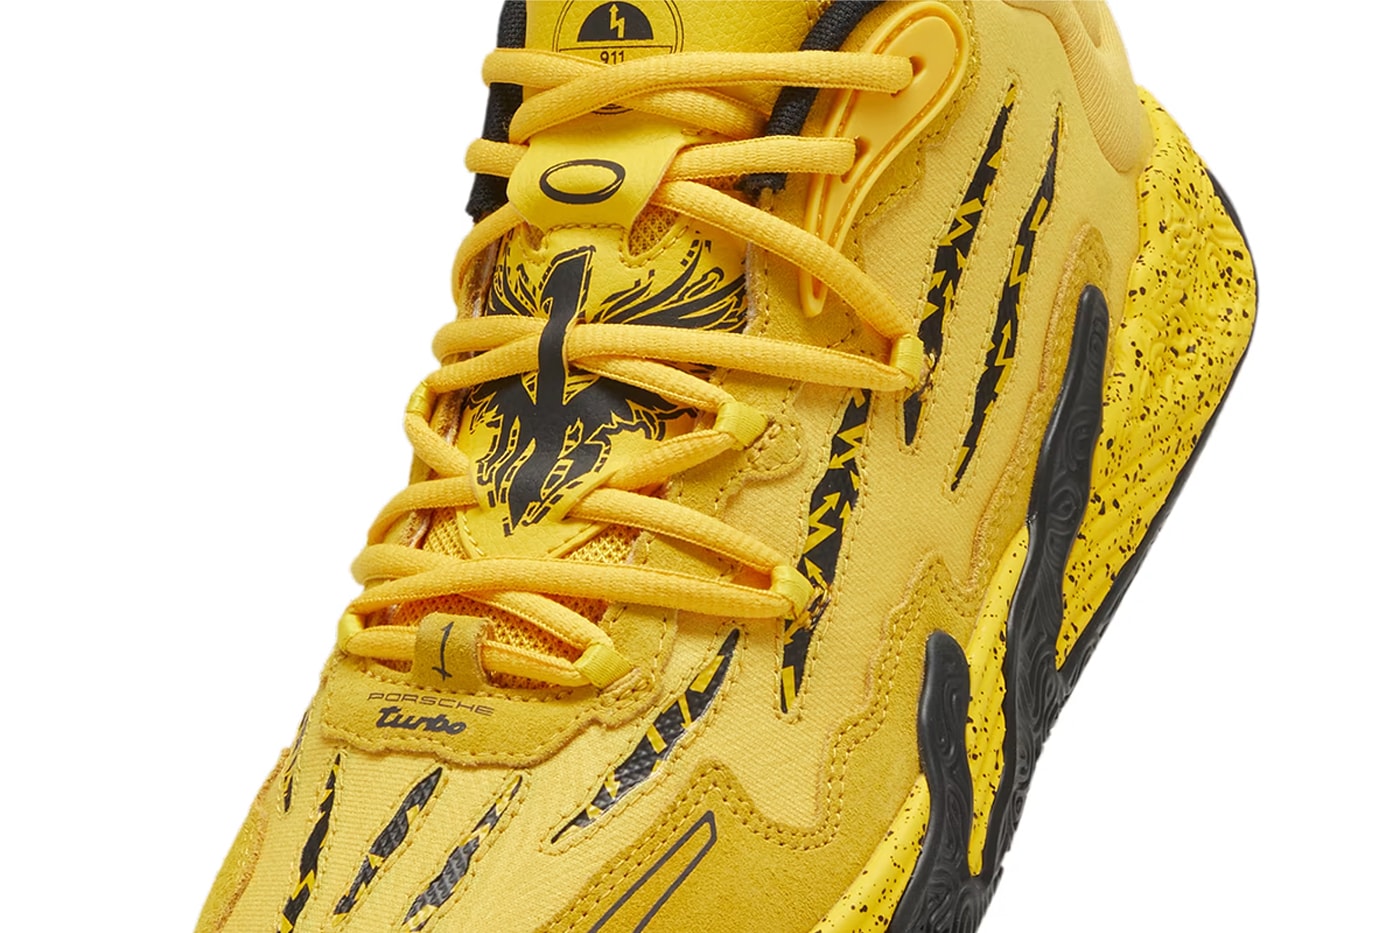 Official Look at the Porsche x PUMA MB.03 Sport Yellow/Sport Yellow-Black february release info lamelo ball